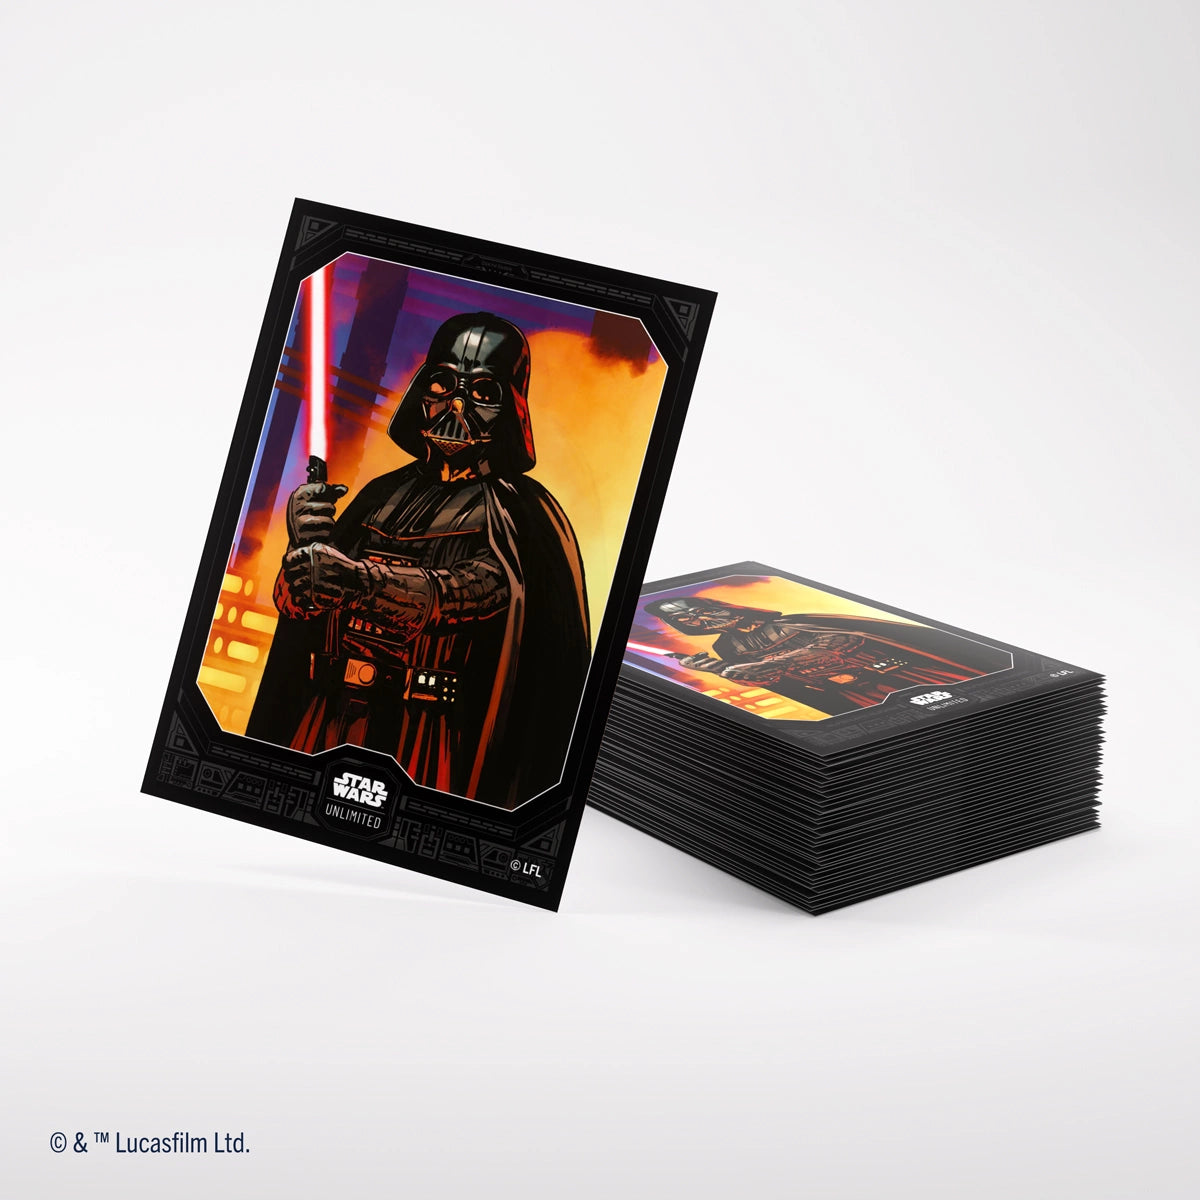 GAMEGENIC - STAR WARS: UNLIMITED ART SLEEVES